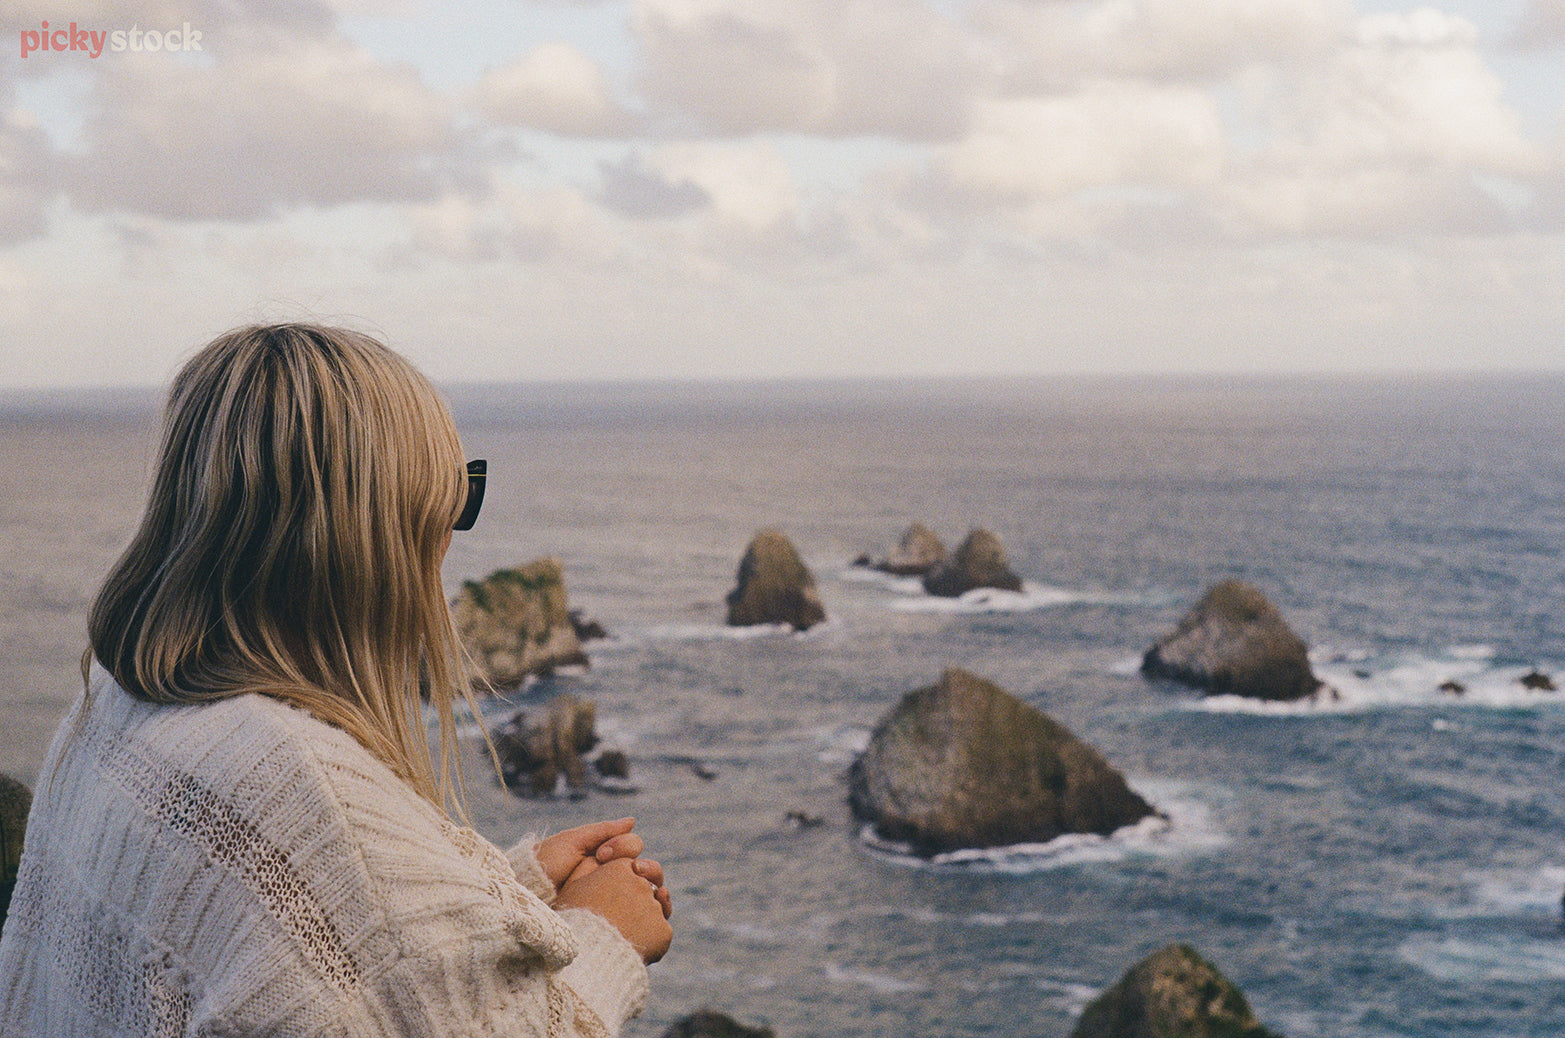 Blonde lady with sunglasses looks out over boulders in the ocean. The day is rather grey, reflected in the water. 